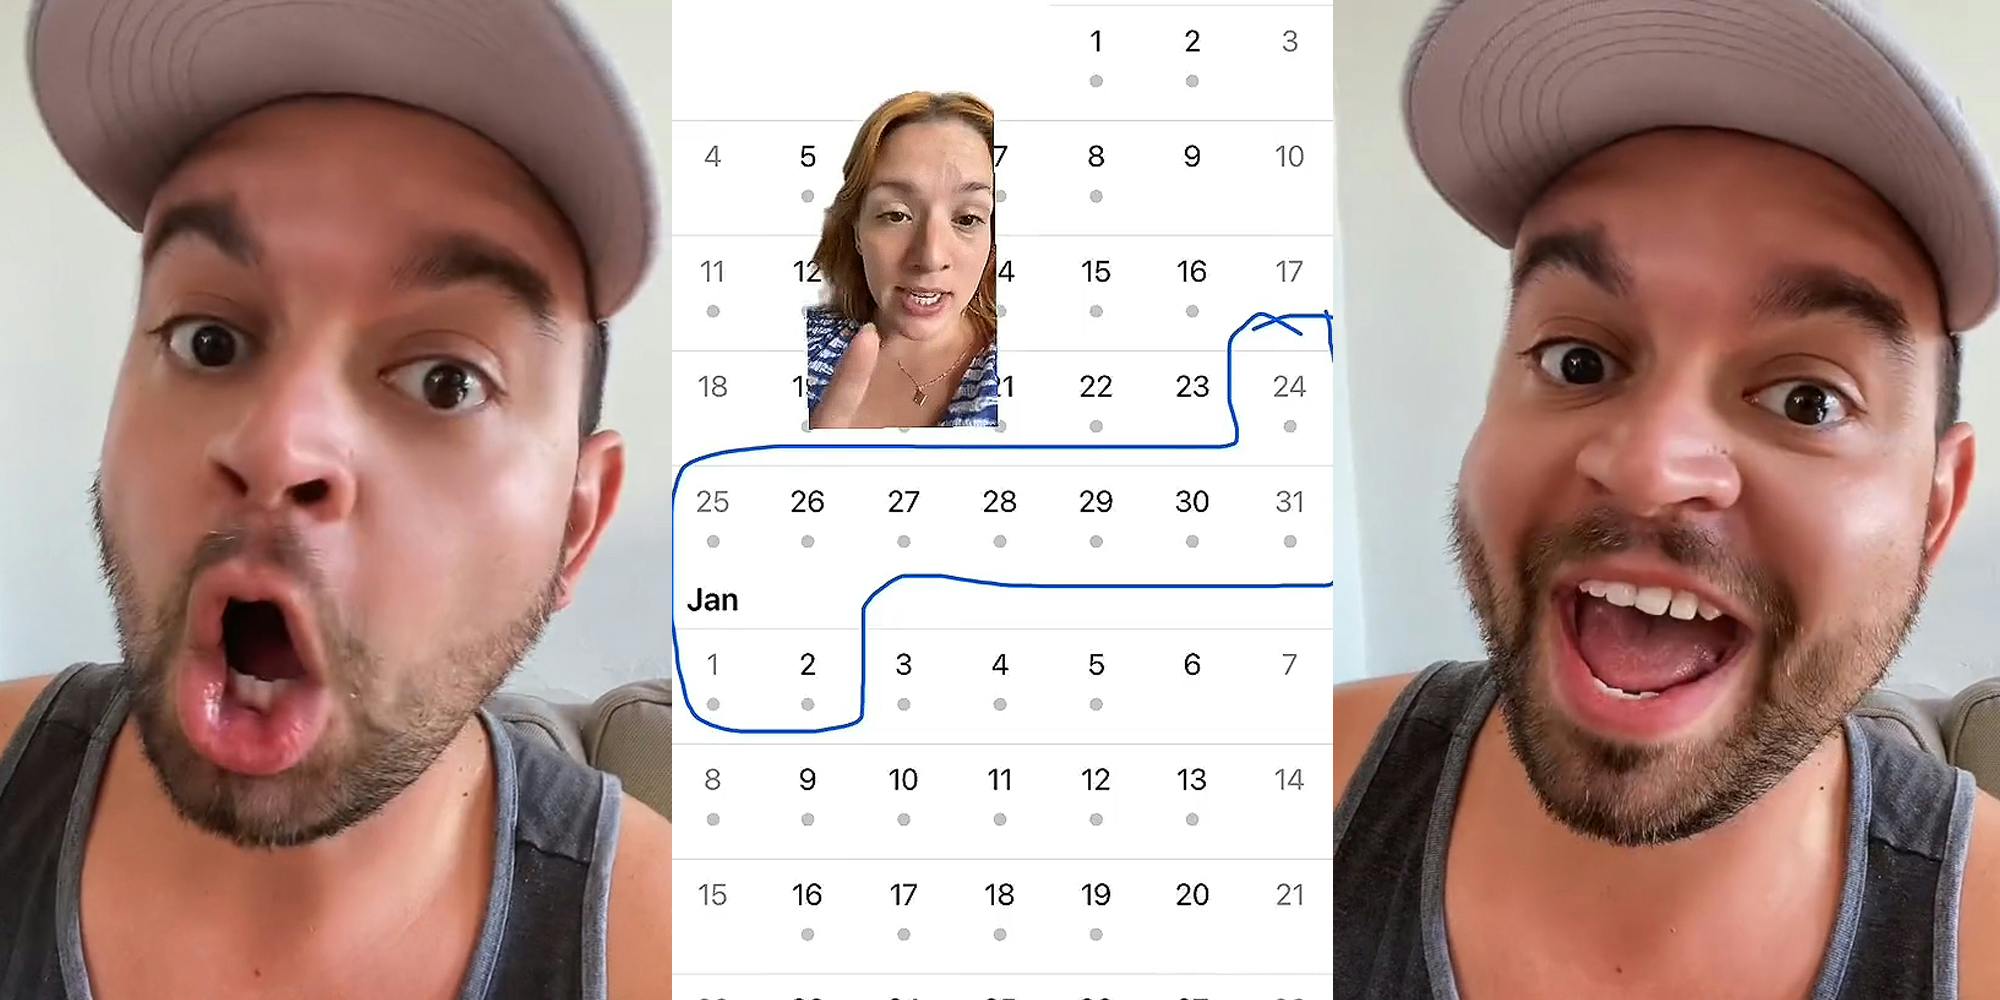 Man speaking saying "NO" on gray background (l) woman greenscreen TikTok over December-January calendar with dates December 24th- January 2nd circled in blue (c) Man speaking on gray background (r)